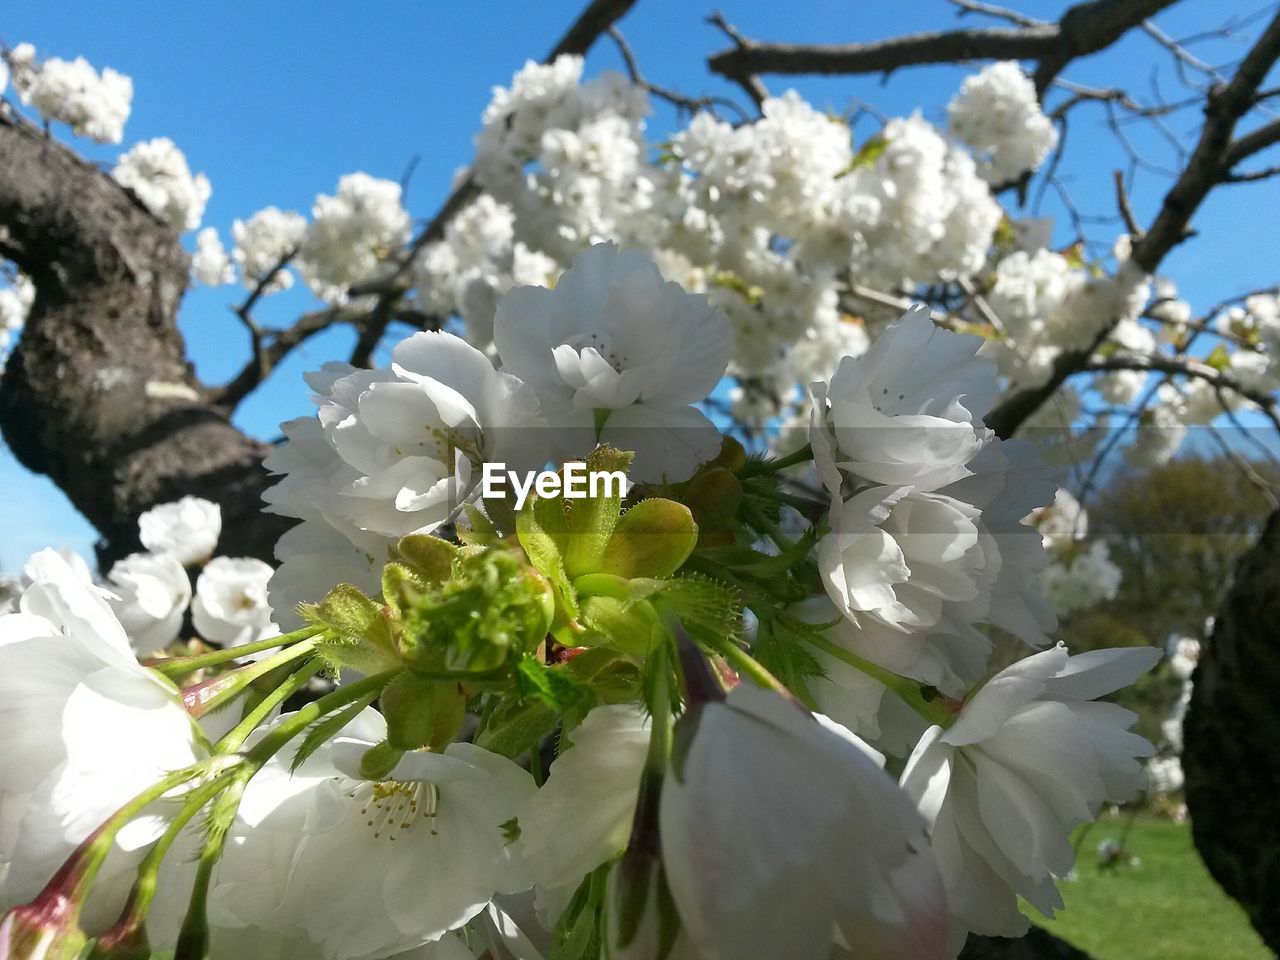 CLOSE-UP OF WHITE FLOWERS GROWING ON TREE